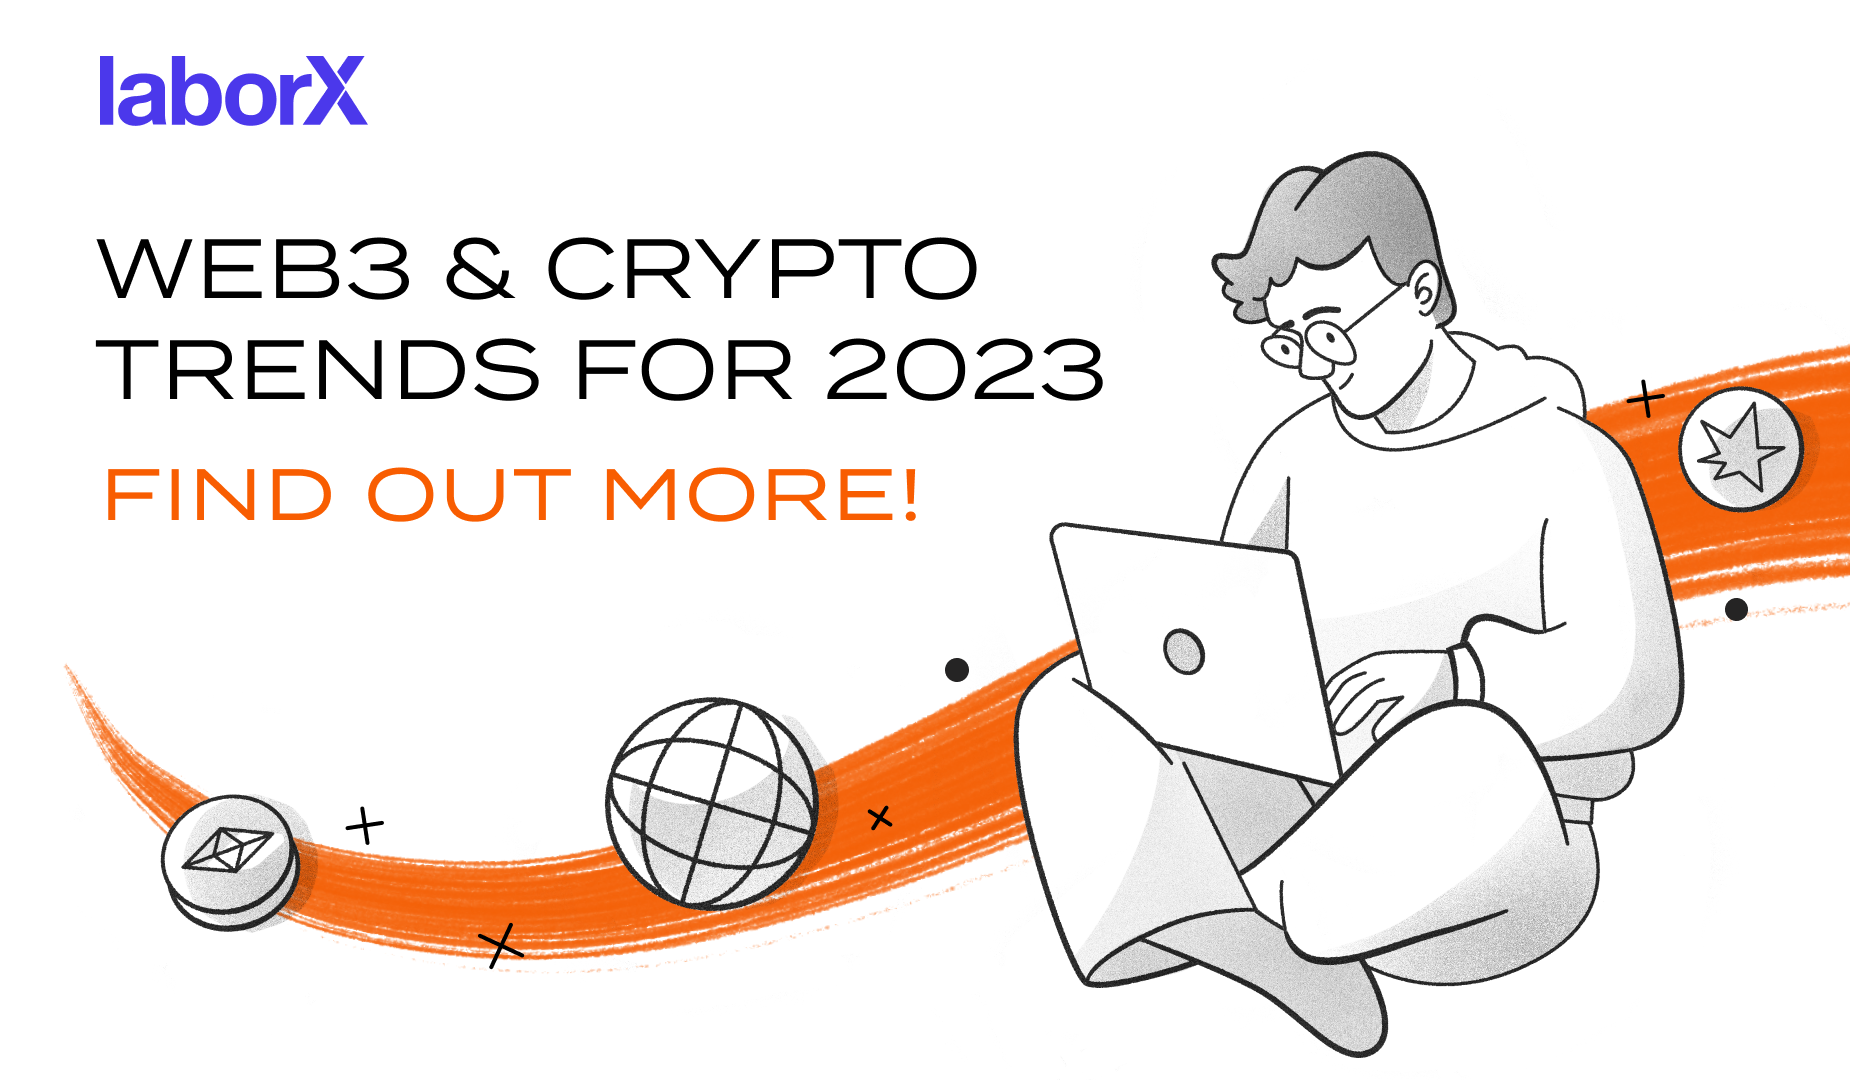 7 Web3 & Crypto Trends For 2023